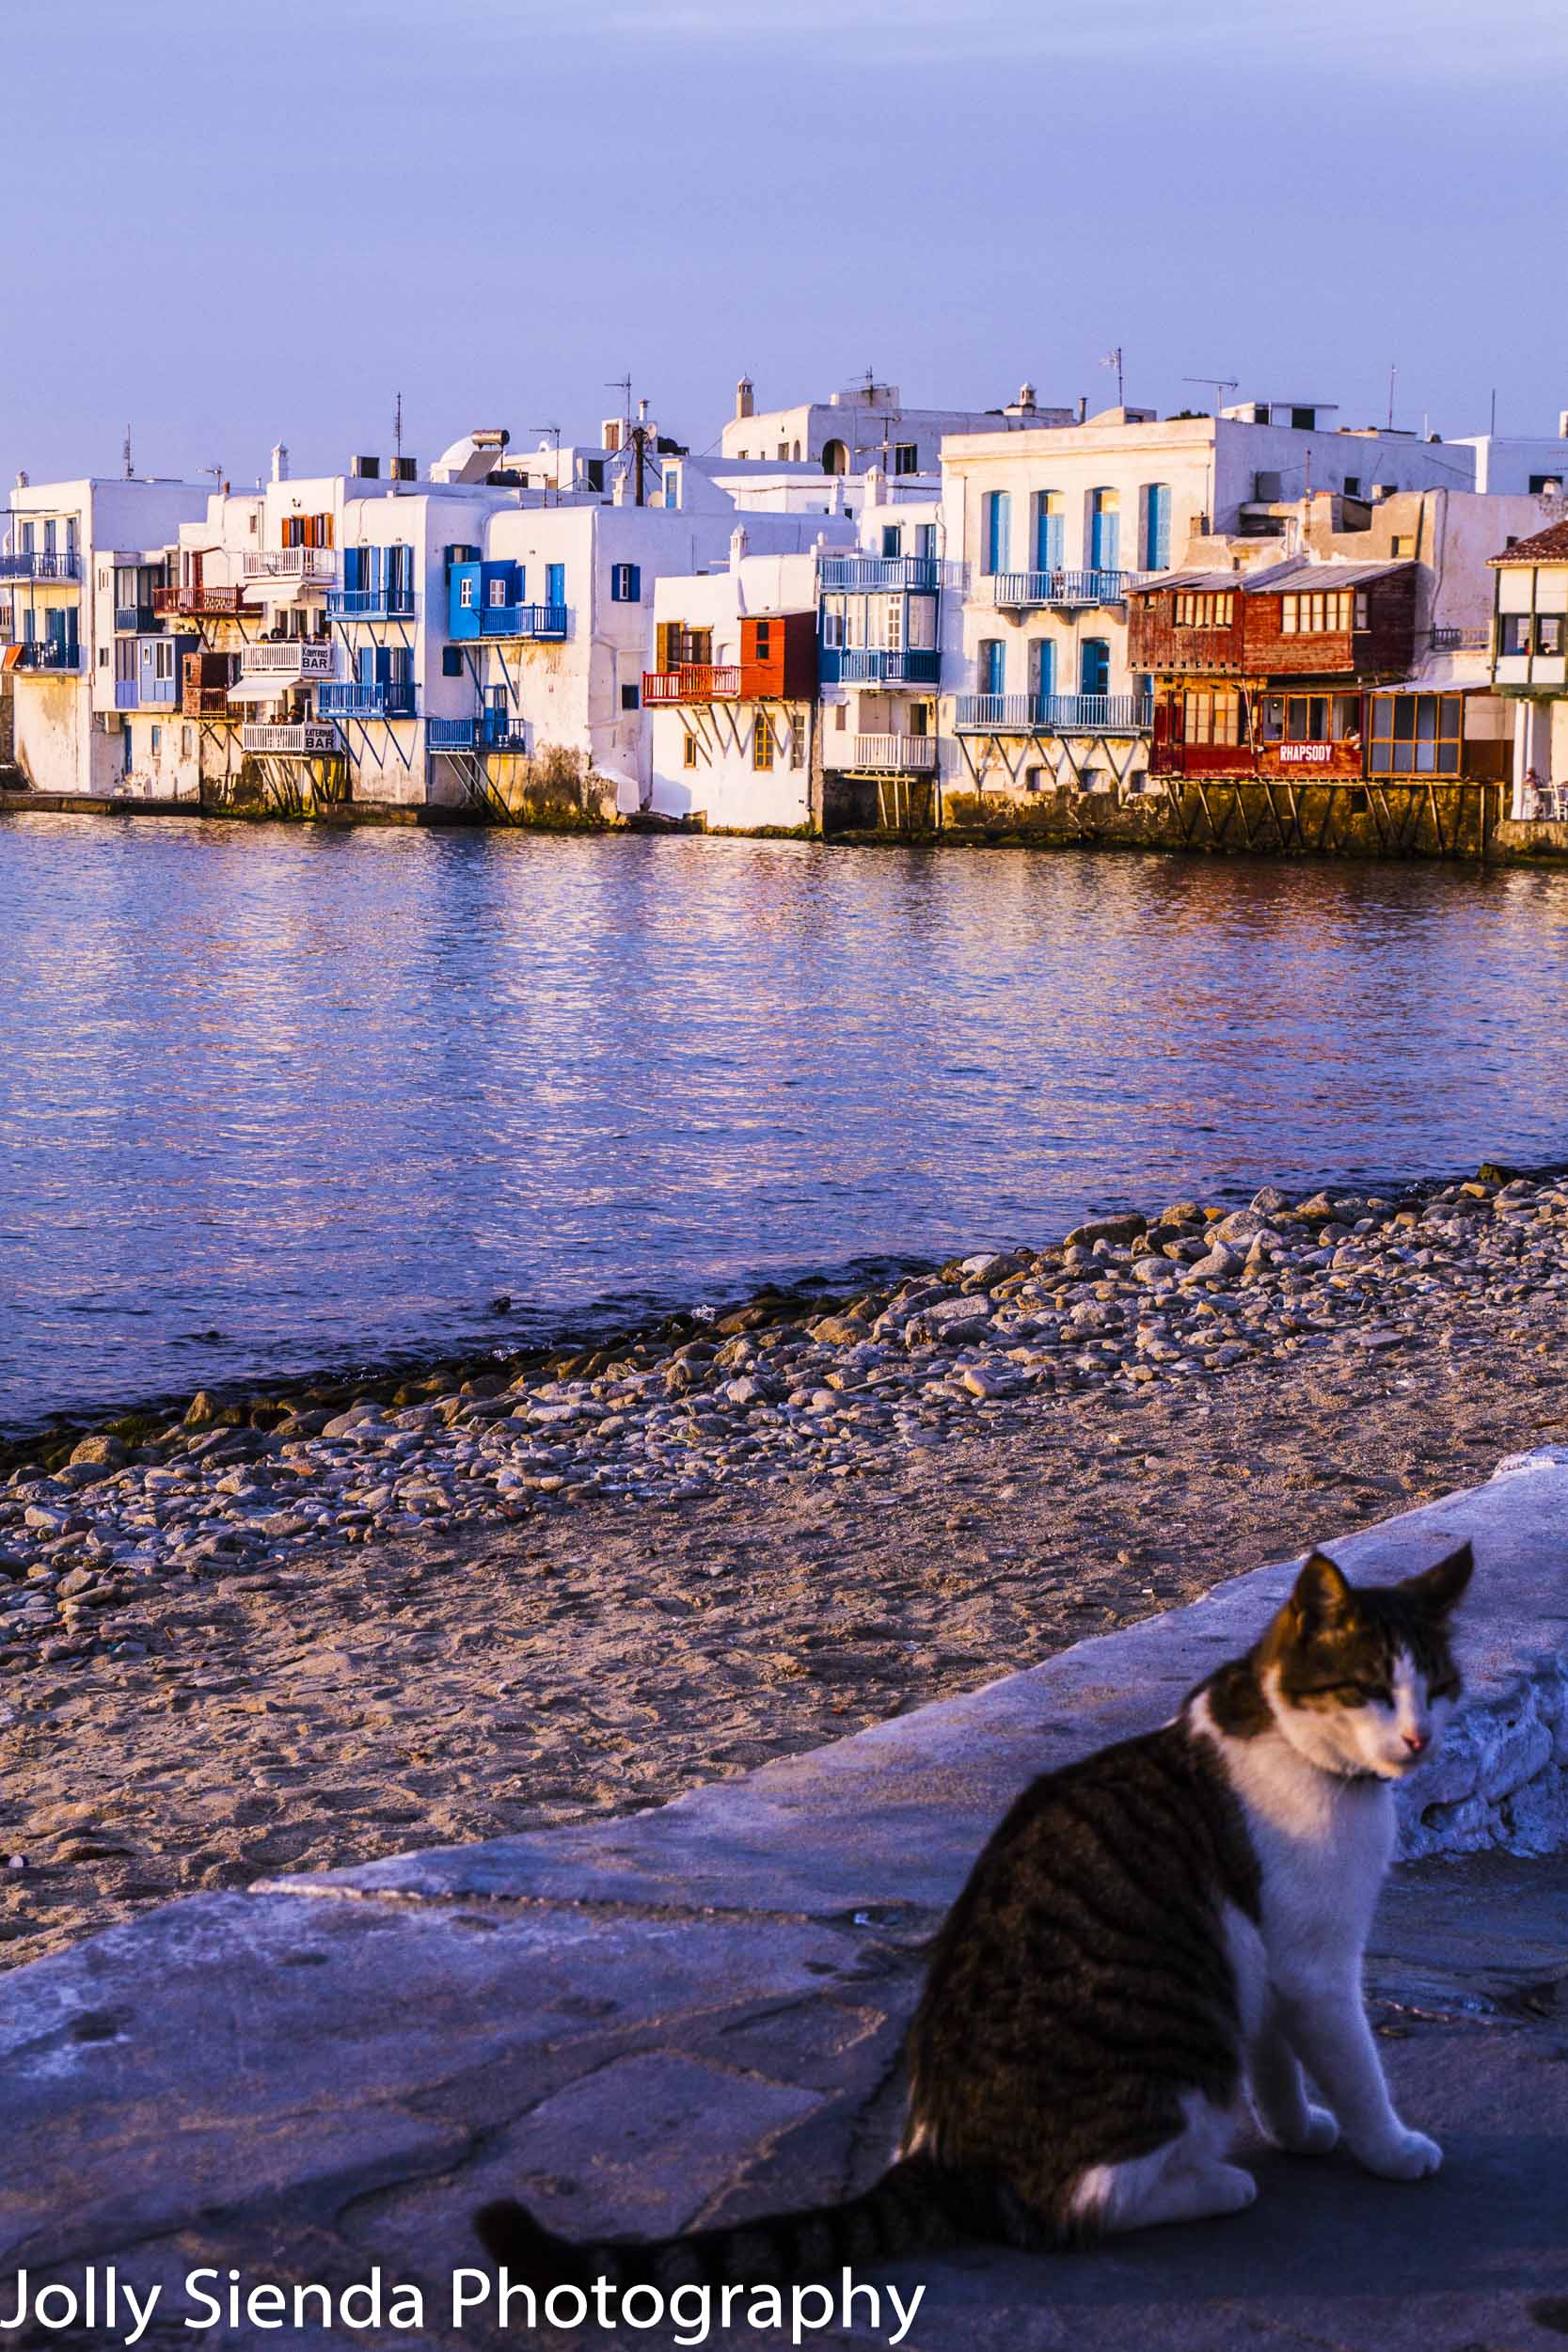 A Tuxedo Cat Pauses at Sunset with the town of Mykonos, Greece i